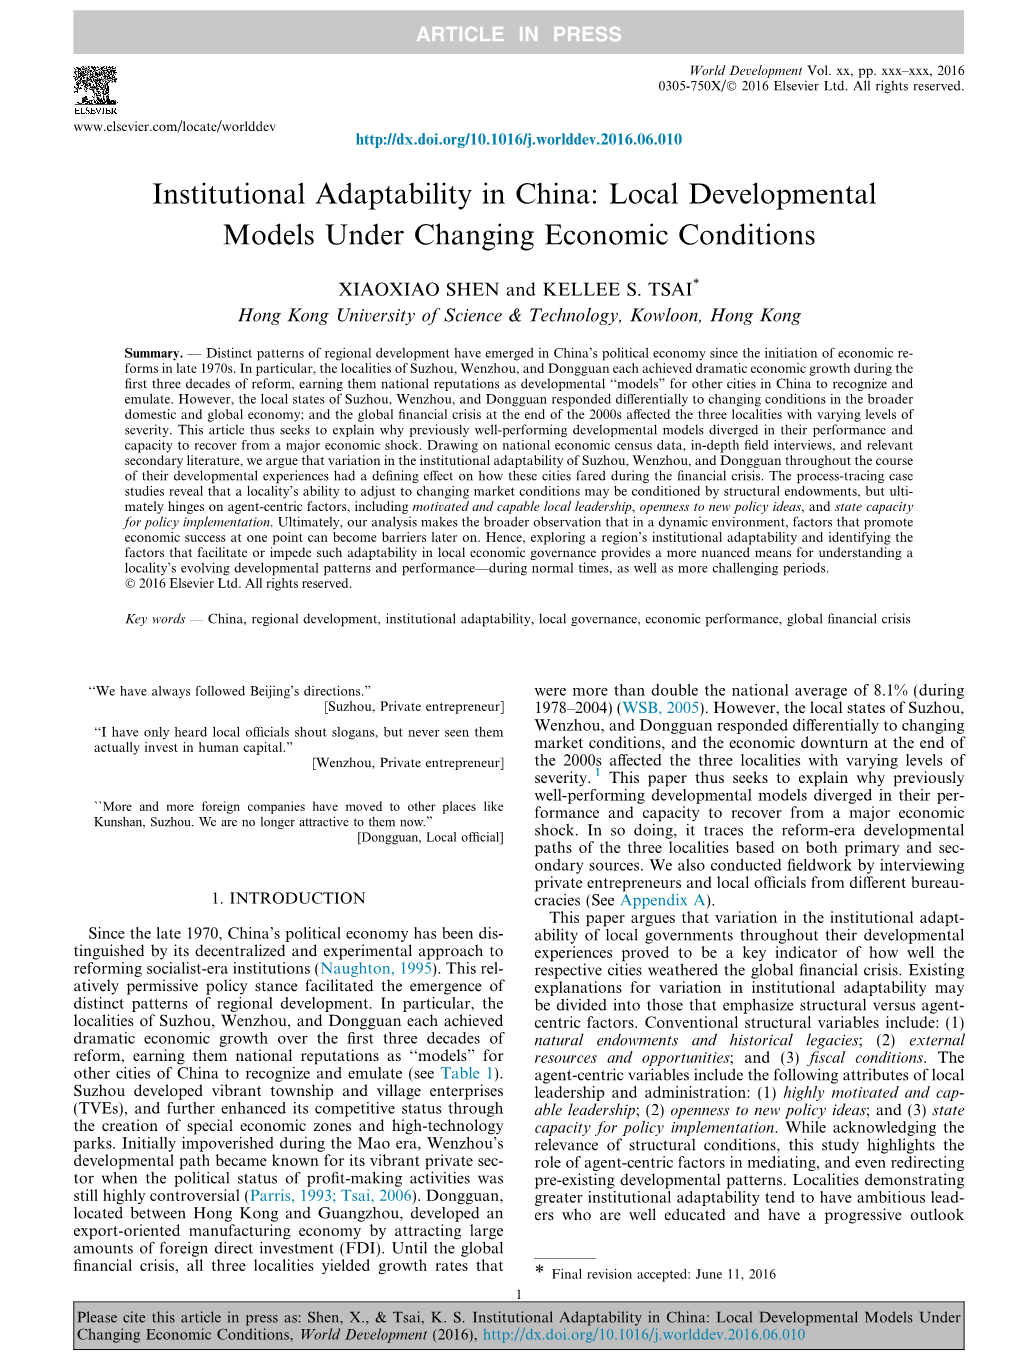 Local Developmental Models Under Changing Economic Conditions